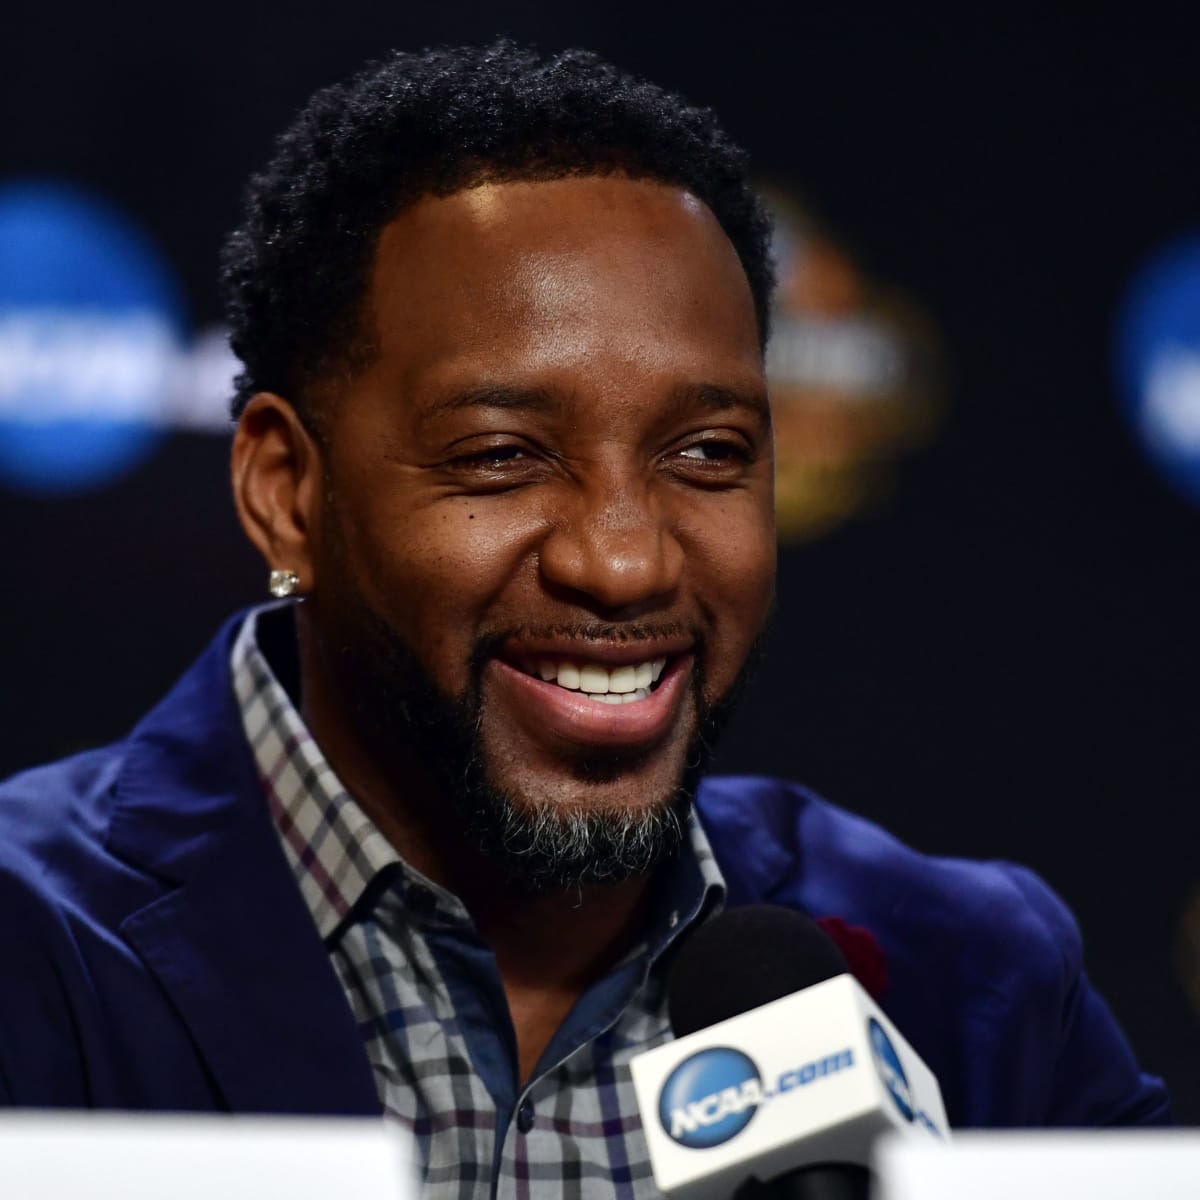 Tracy McGrady skipped college once Adidas offered him a shoe contract